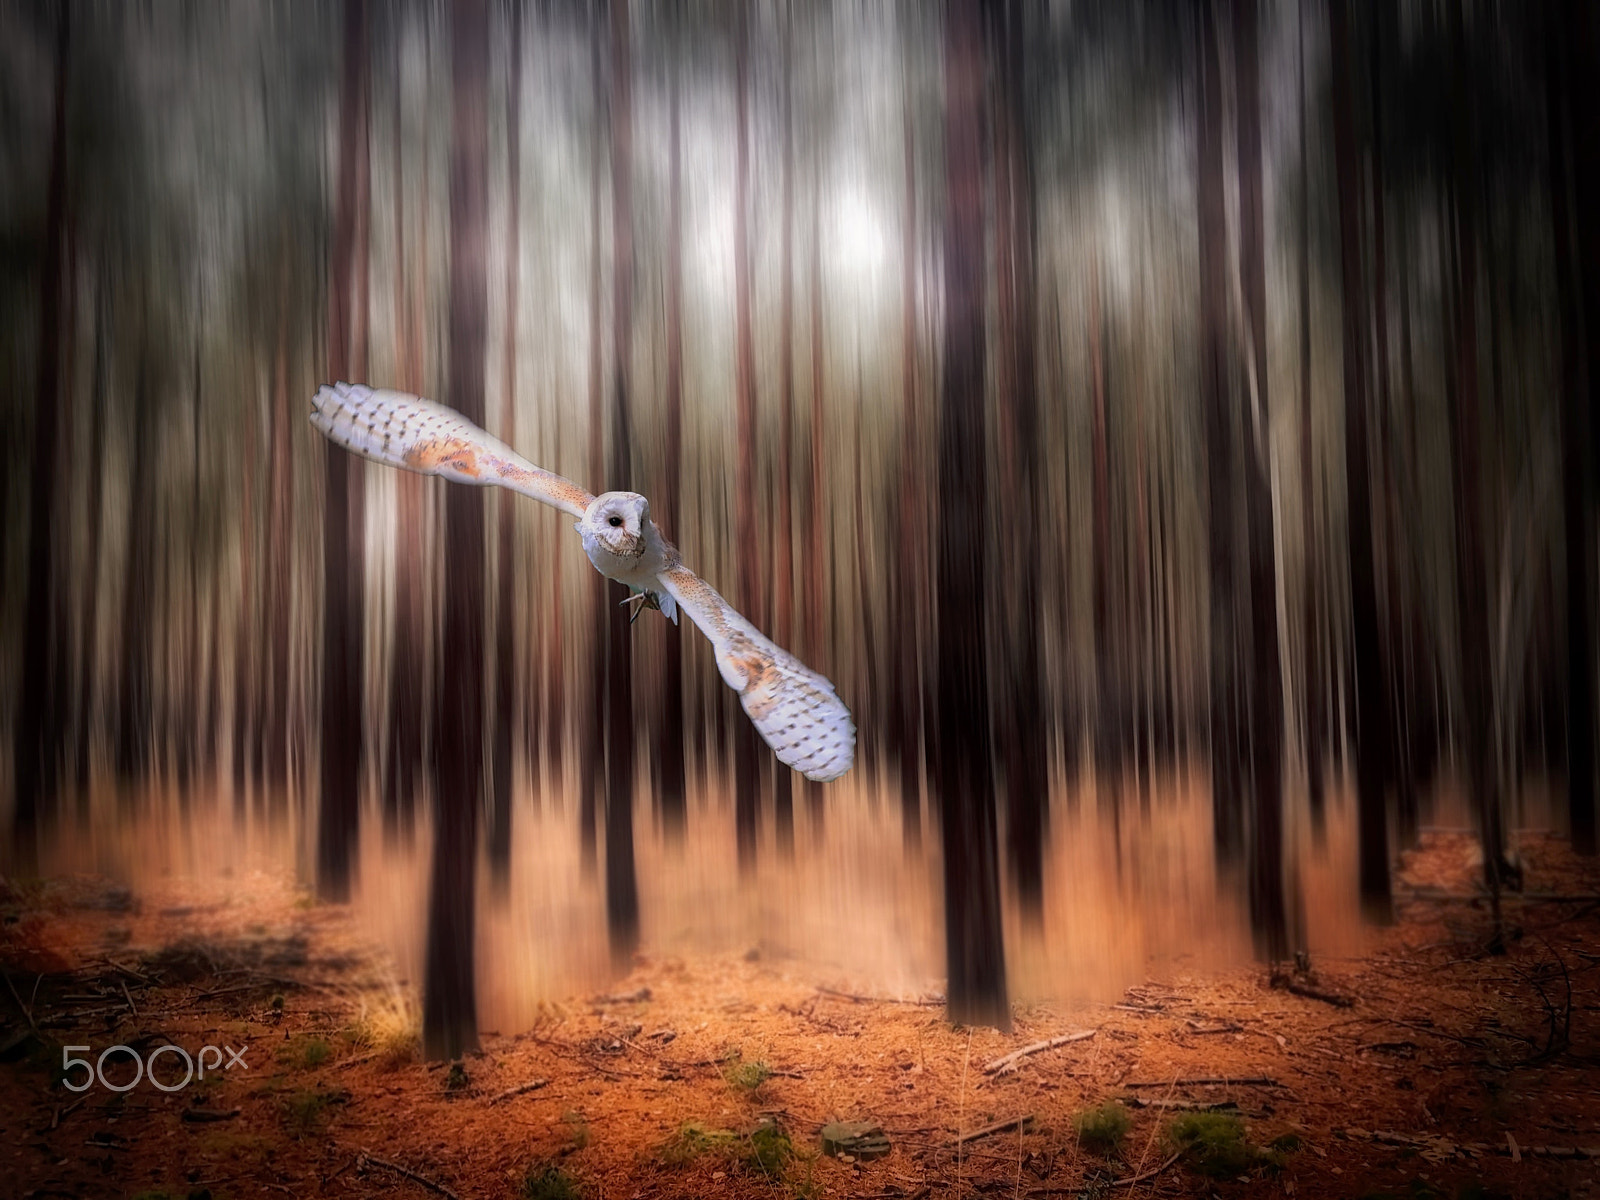 Apple iPhone sample photo. Creative - barn owl in a forest photography